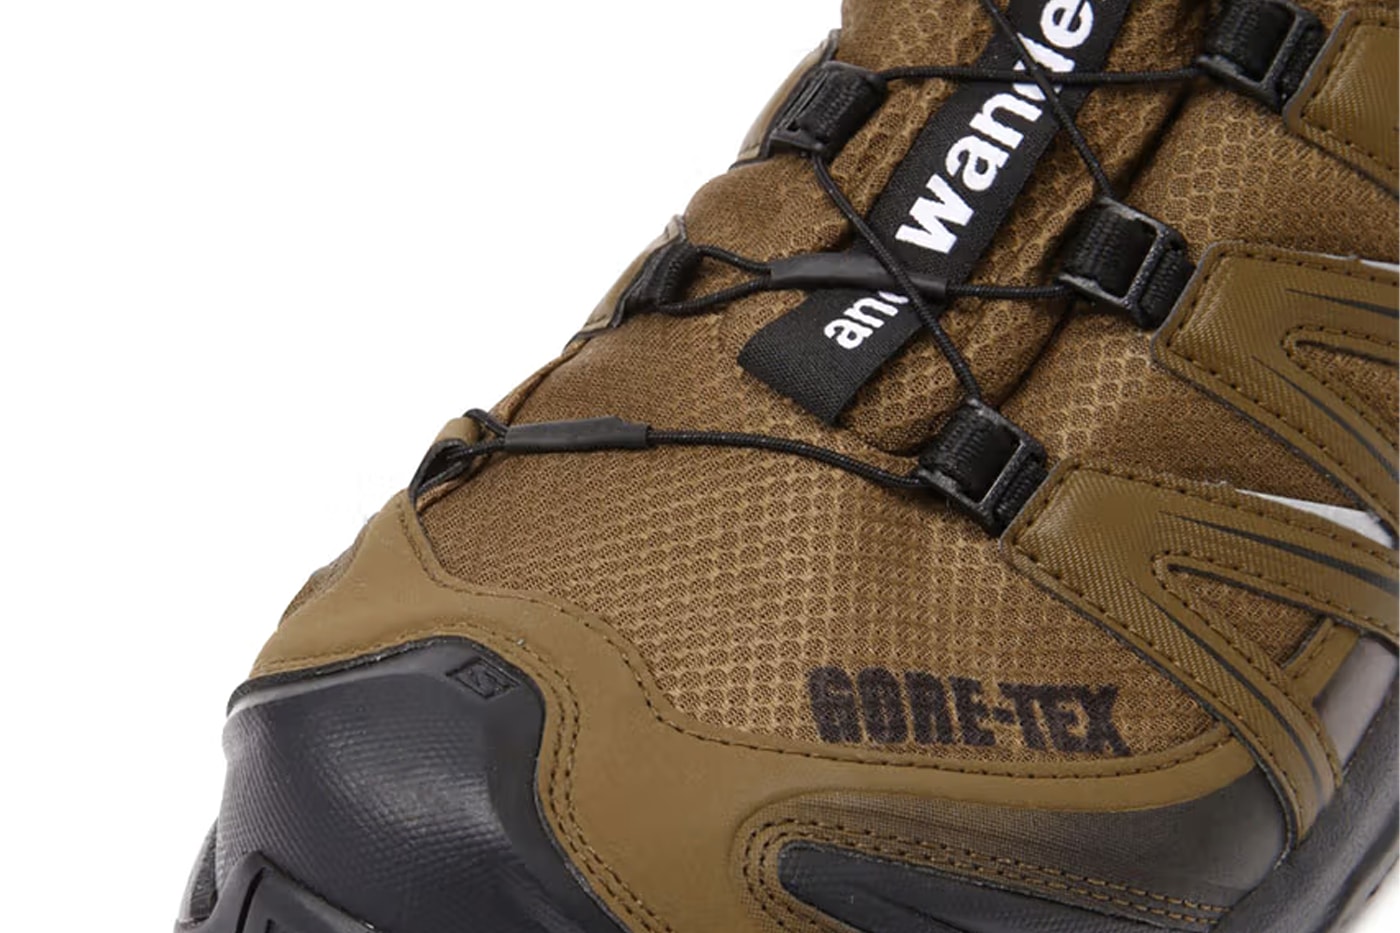 and wander Reunites With Salomon for XA PRO 3D Gore-Tex Sneakers brown and black functional shoe gtx hiking outdoor shoe 